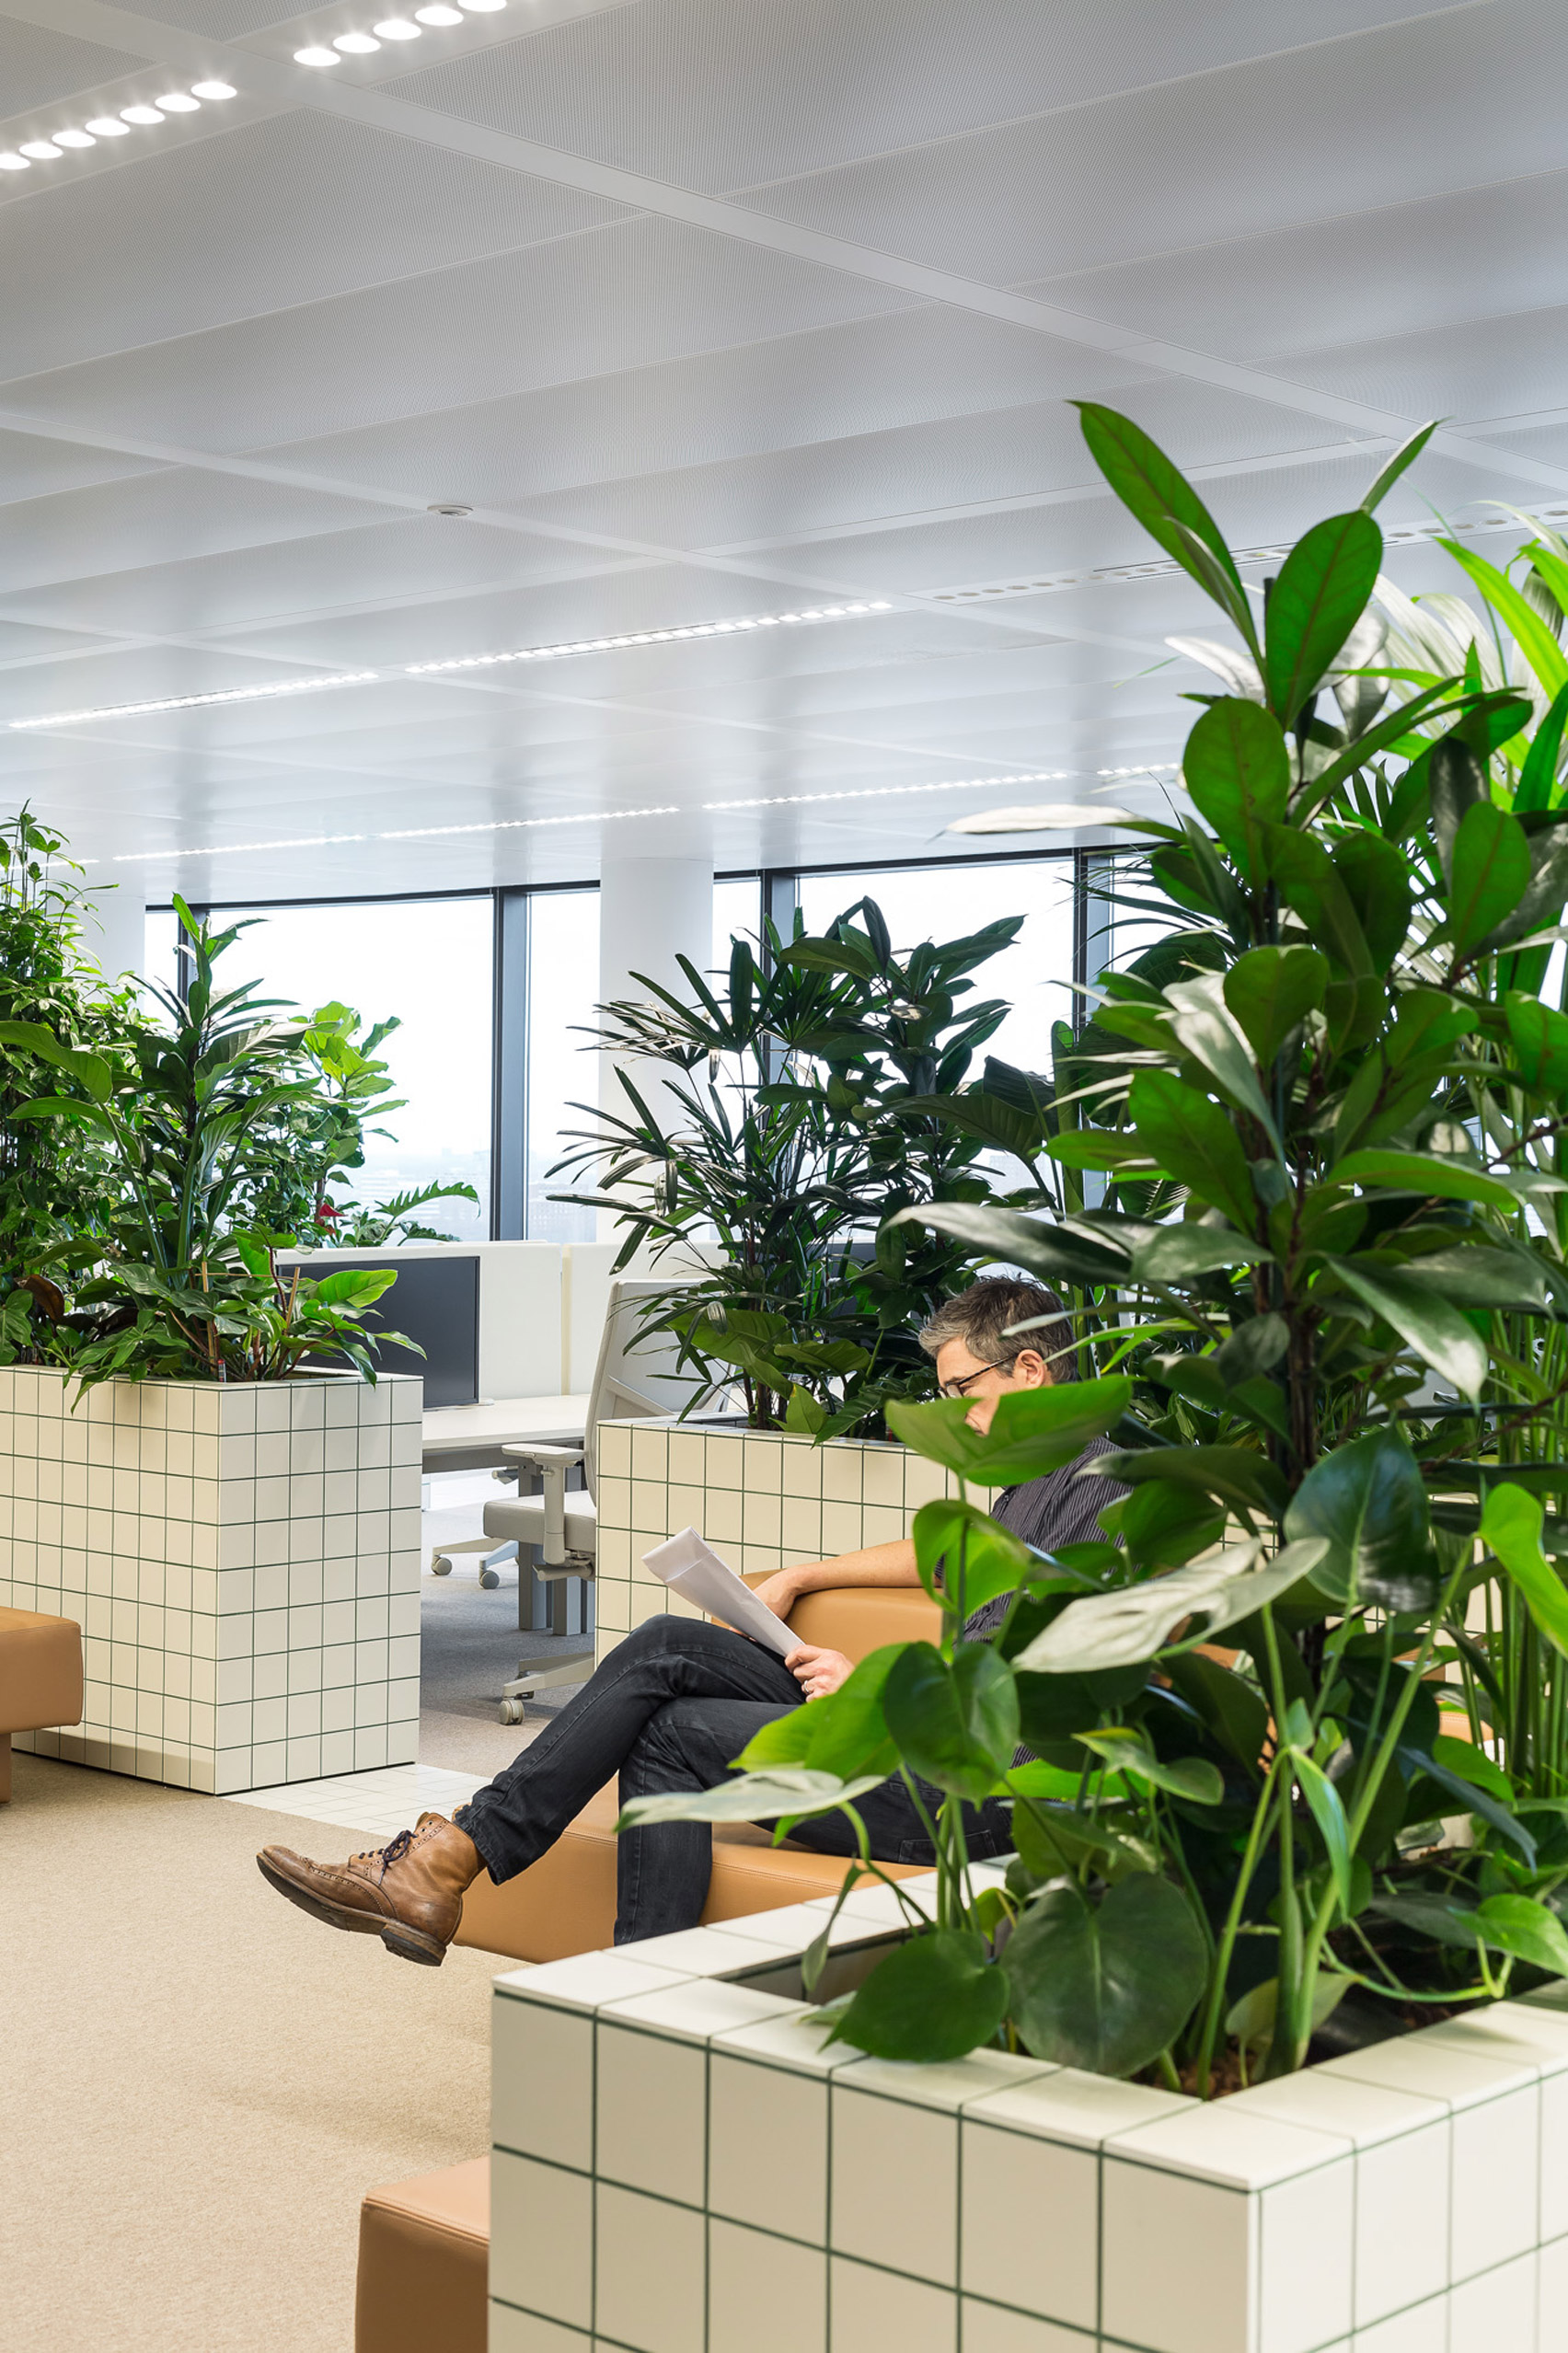 geur cultuur Het strand Space Encounters uses planted partitions to divide Synchroon's Utrecht  office